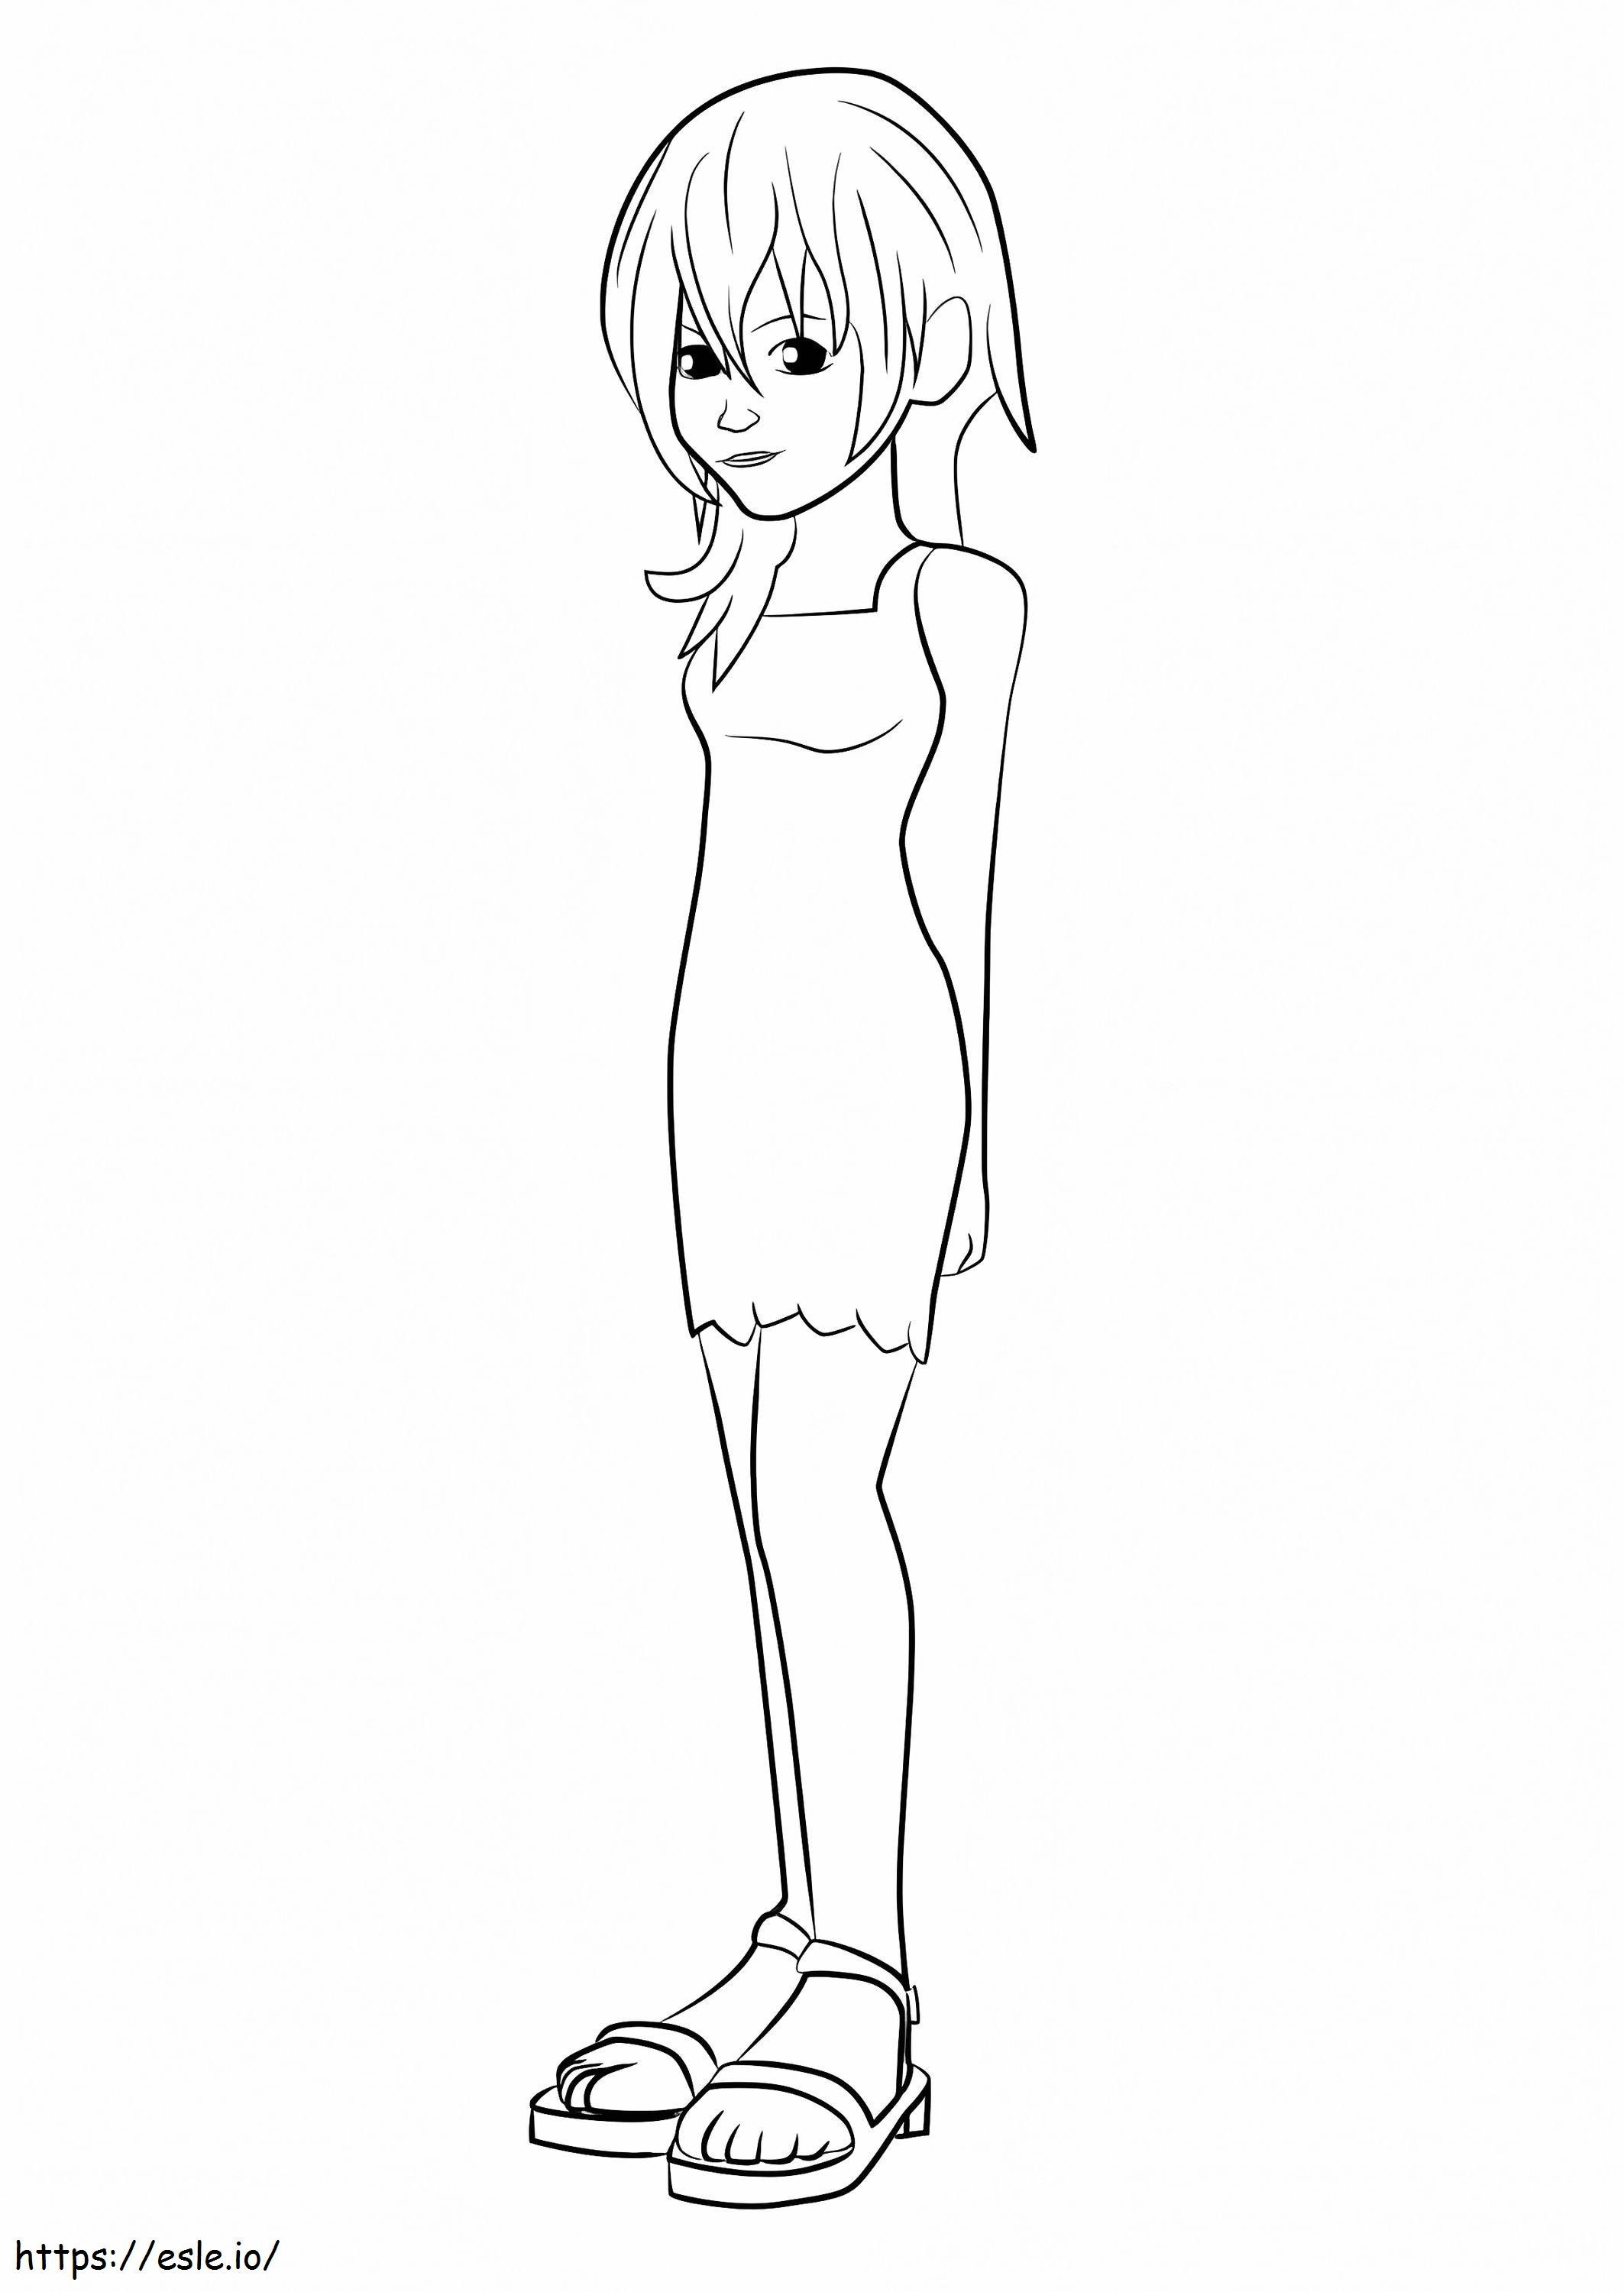 Namine From Kingdom Hearts coloring page